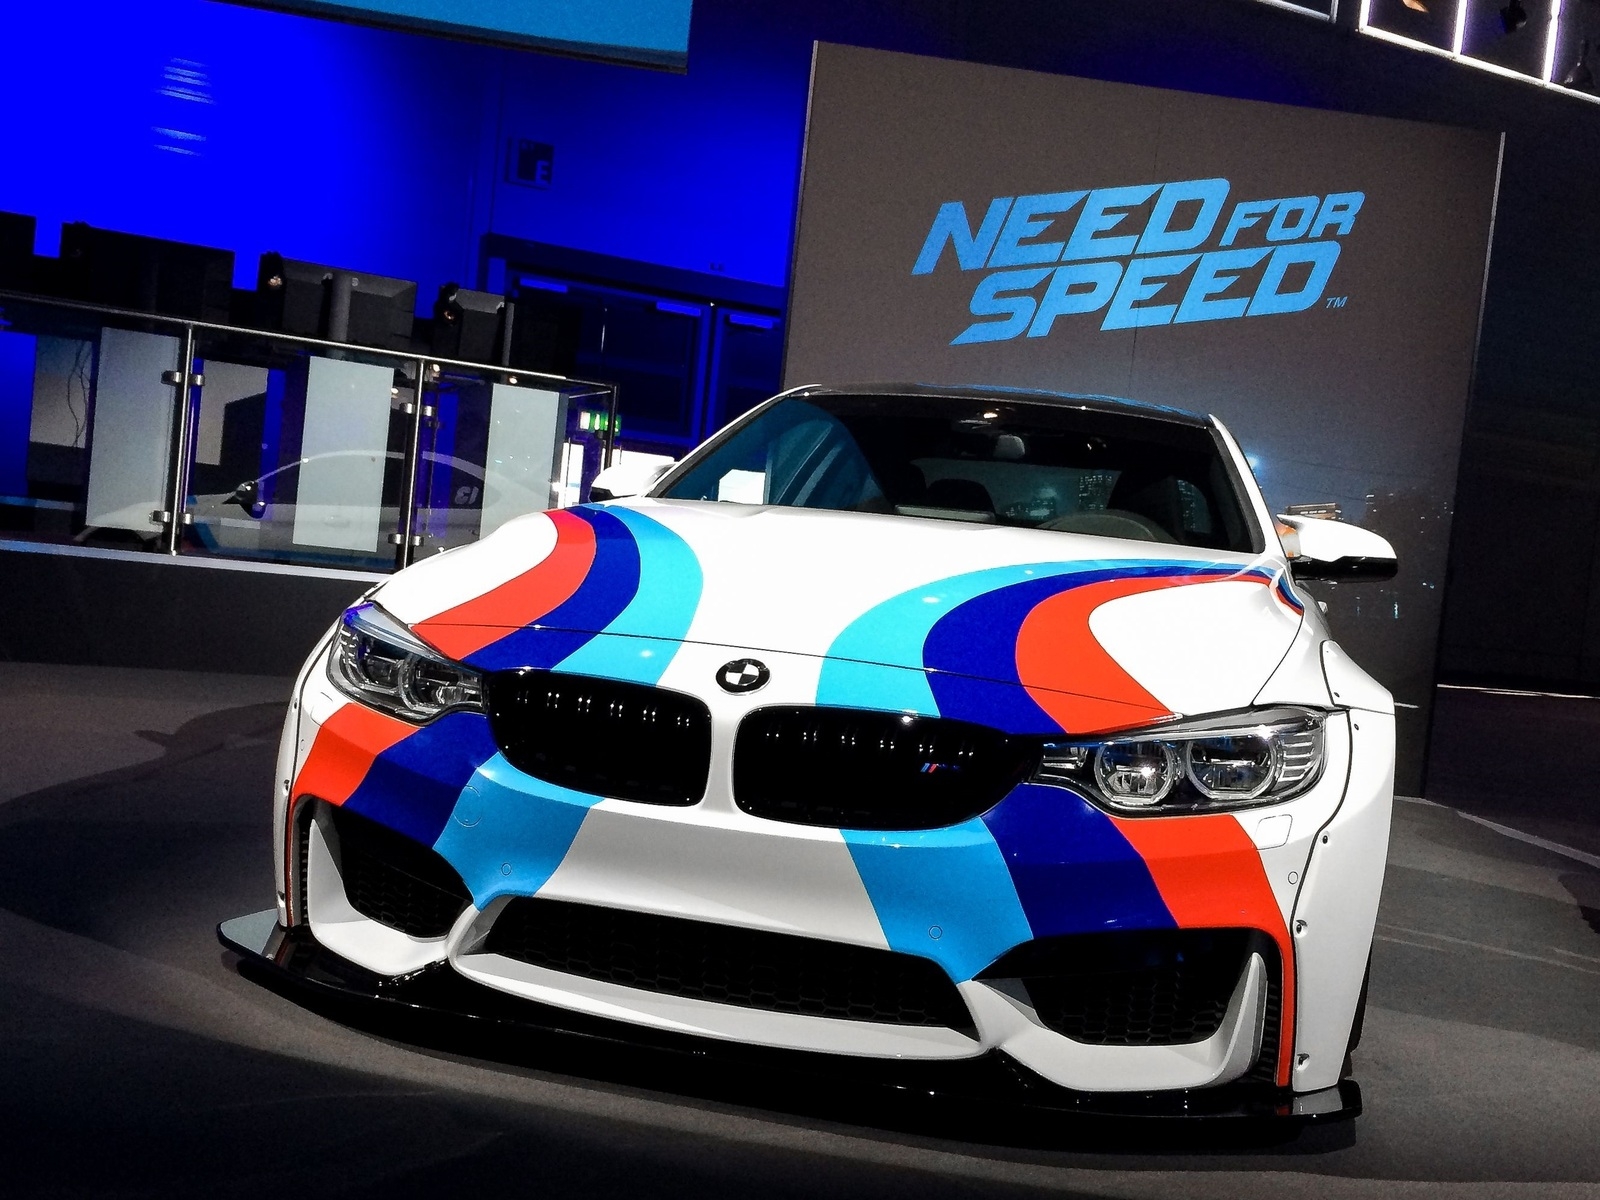 Need For Speed BMW for 1600 x 1200 resolution